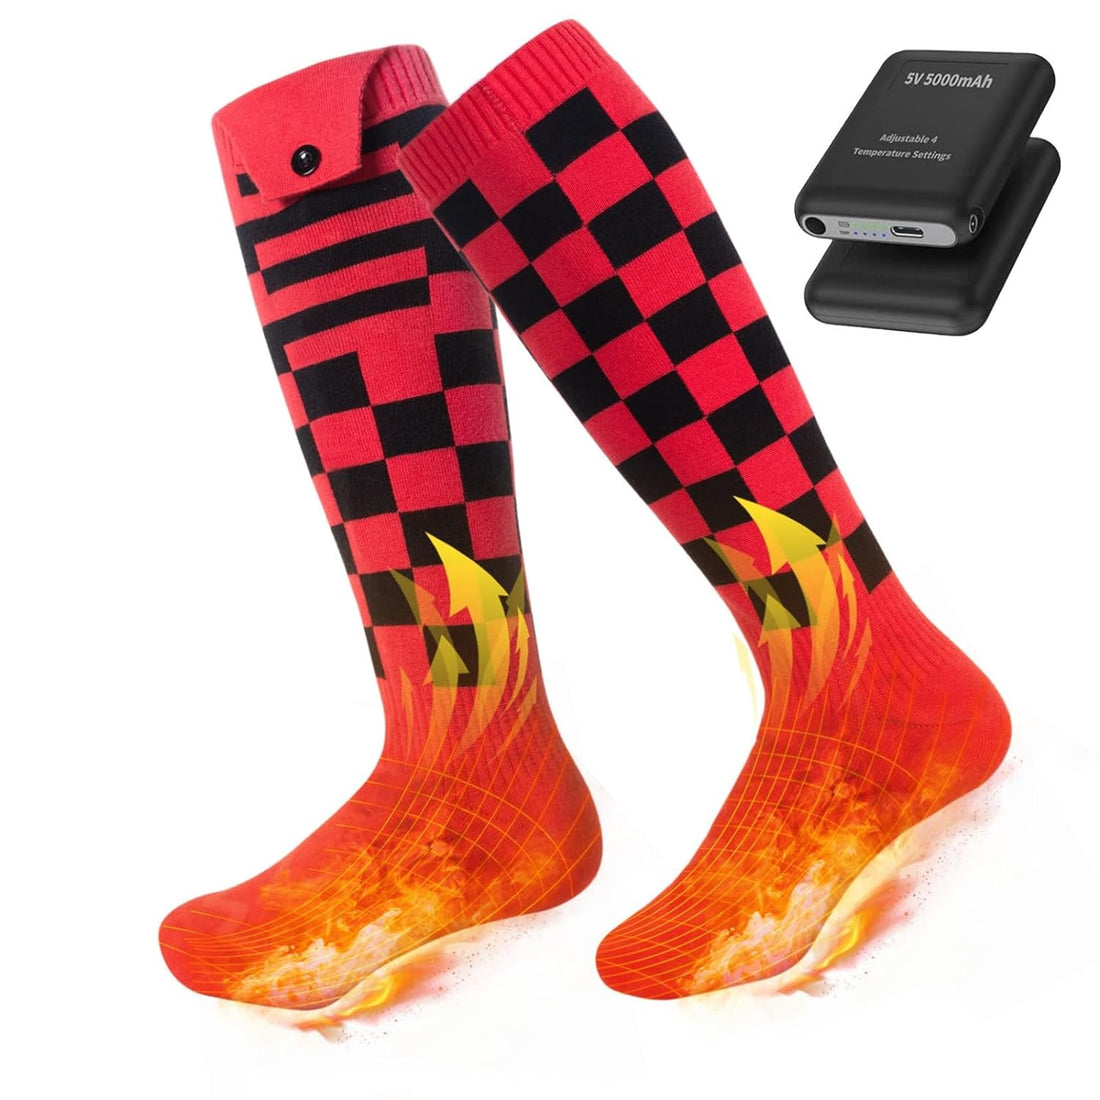 Heated Socks for Men Women, Rechargeable Electric Socks,5V 5000mAh Batteries Powered Thermal Foot Warmers with 4 Heat Settings for Hunting,Skiing,Camping and Winter Outdoors Working (Red and Black)